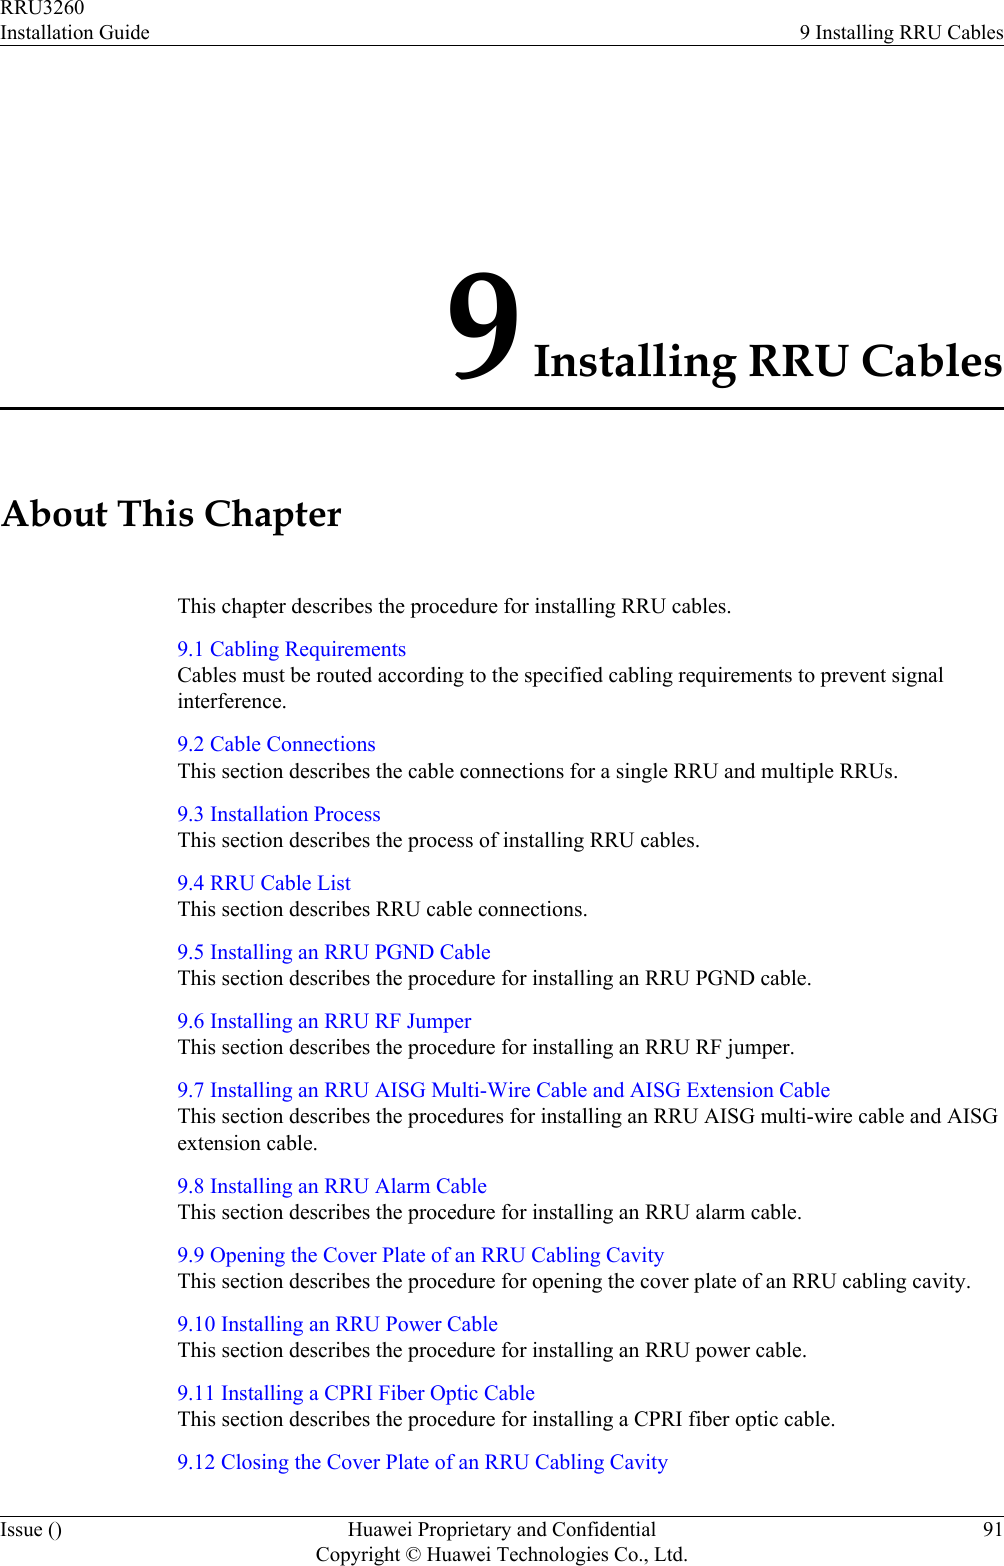 9 Installing RRU CablesAbout This ChapterThis chapter describes the procedure for installing RRU cables.9.1 Cabling RequirementsCables must be routed according to the specified cabling requirements to prevent signalinterference.9.2 Cable ConnectionsThis section describes the cable connections for a single RRU and multiple RRUs.9.3 Installation ProcessThis section describes the process of installing RRU cables.9.4 RRU Cable ListThis section describes RRU cable connections.9.5 Installing an RRU PGND CableThis section describes the procedure for installing an RRU PGND cable.9.6 Installing an RRU RF JumperThis section describes the procedure for installing an RRU RF jumper.9.7 Installing an RRU AISG Multi-Wire Cable and AISG Extension CableThis section describes the procedures for installing an RRU AISG multi-wire cable and AISGextension cable.9.8 Installing an RRU Alarm CableThis section describes the procedure for installing an RRU alarm cable.9.9 Opening the Cover Plate of an RRU Cabling CavityThis section describes the procedure for opening the cover plate of an RRU cabling cavity.9.10 Installing an RRU Power CableThis section describes the procedure for installing an RRU power cable.9.11 Installing a CPRI Fiber Optic CableThis section describes the procedure for installing a CPRI fiber optic cable.9.12 Closing the Cover Plate of an RRU Cabling CavityRRU3260Installation Guide 9 Installing RRU CablesIssue () Huawei Proprietary and ConfidentialCopyright © Huawei Technologies Co., Ltd.91